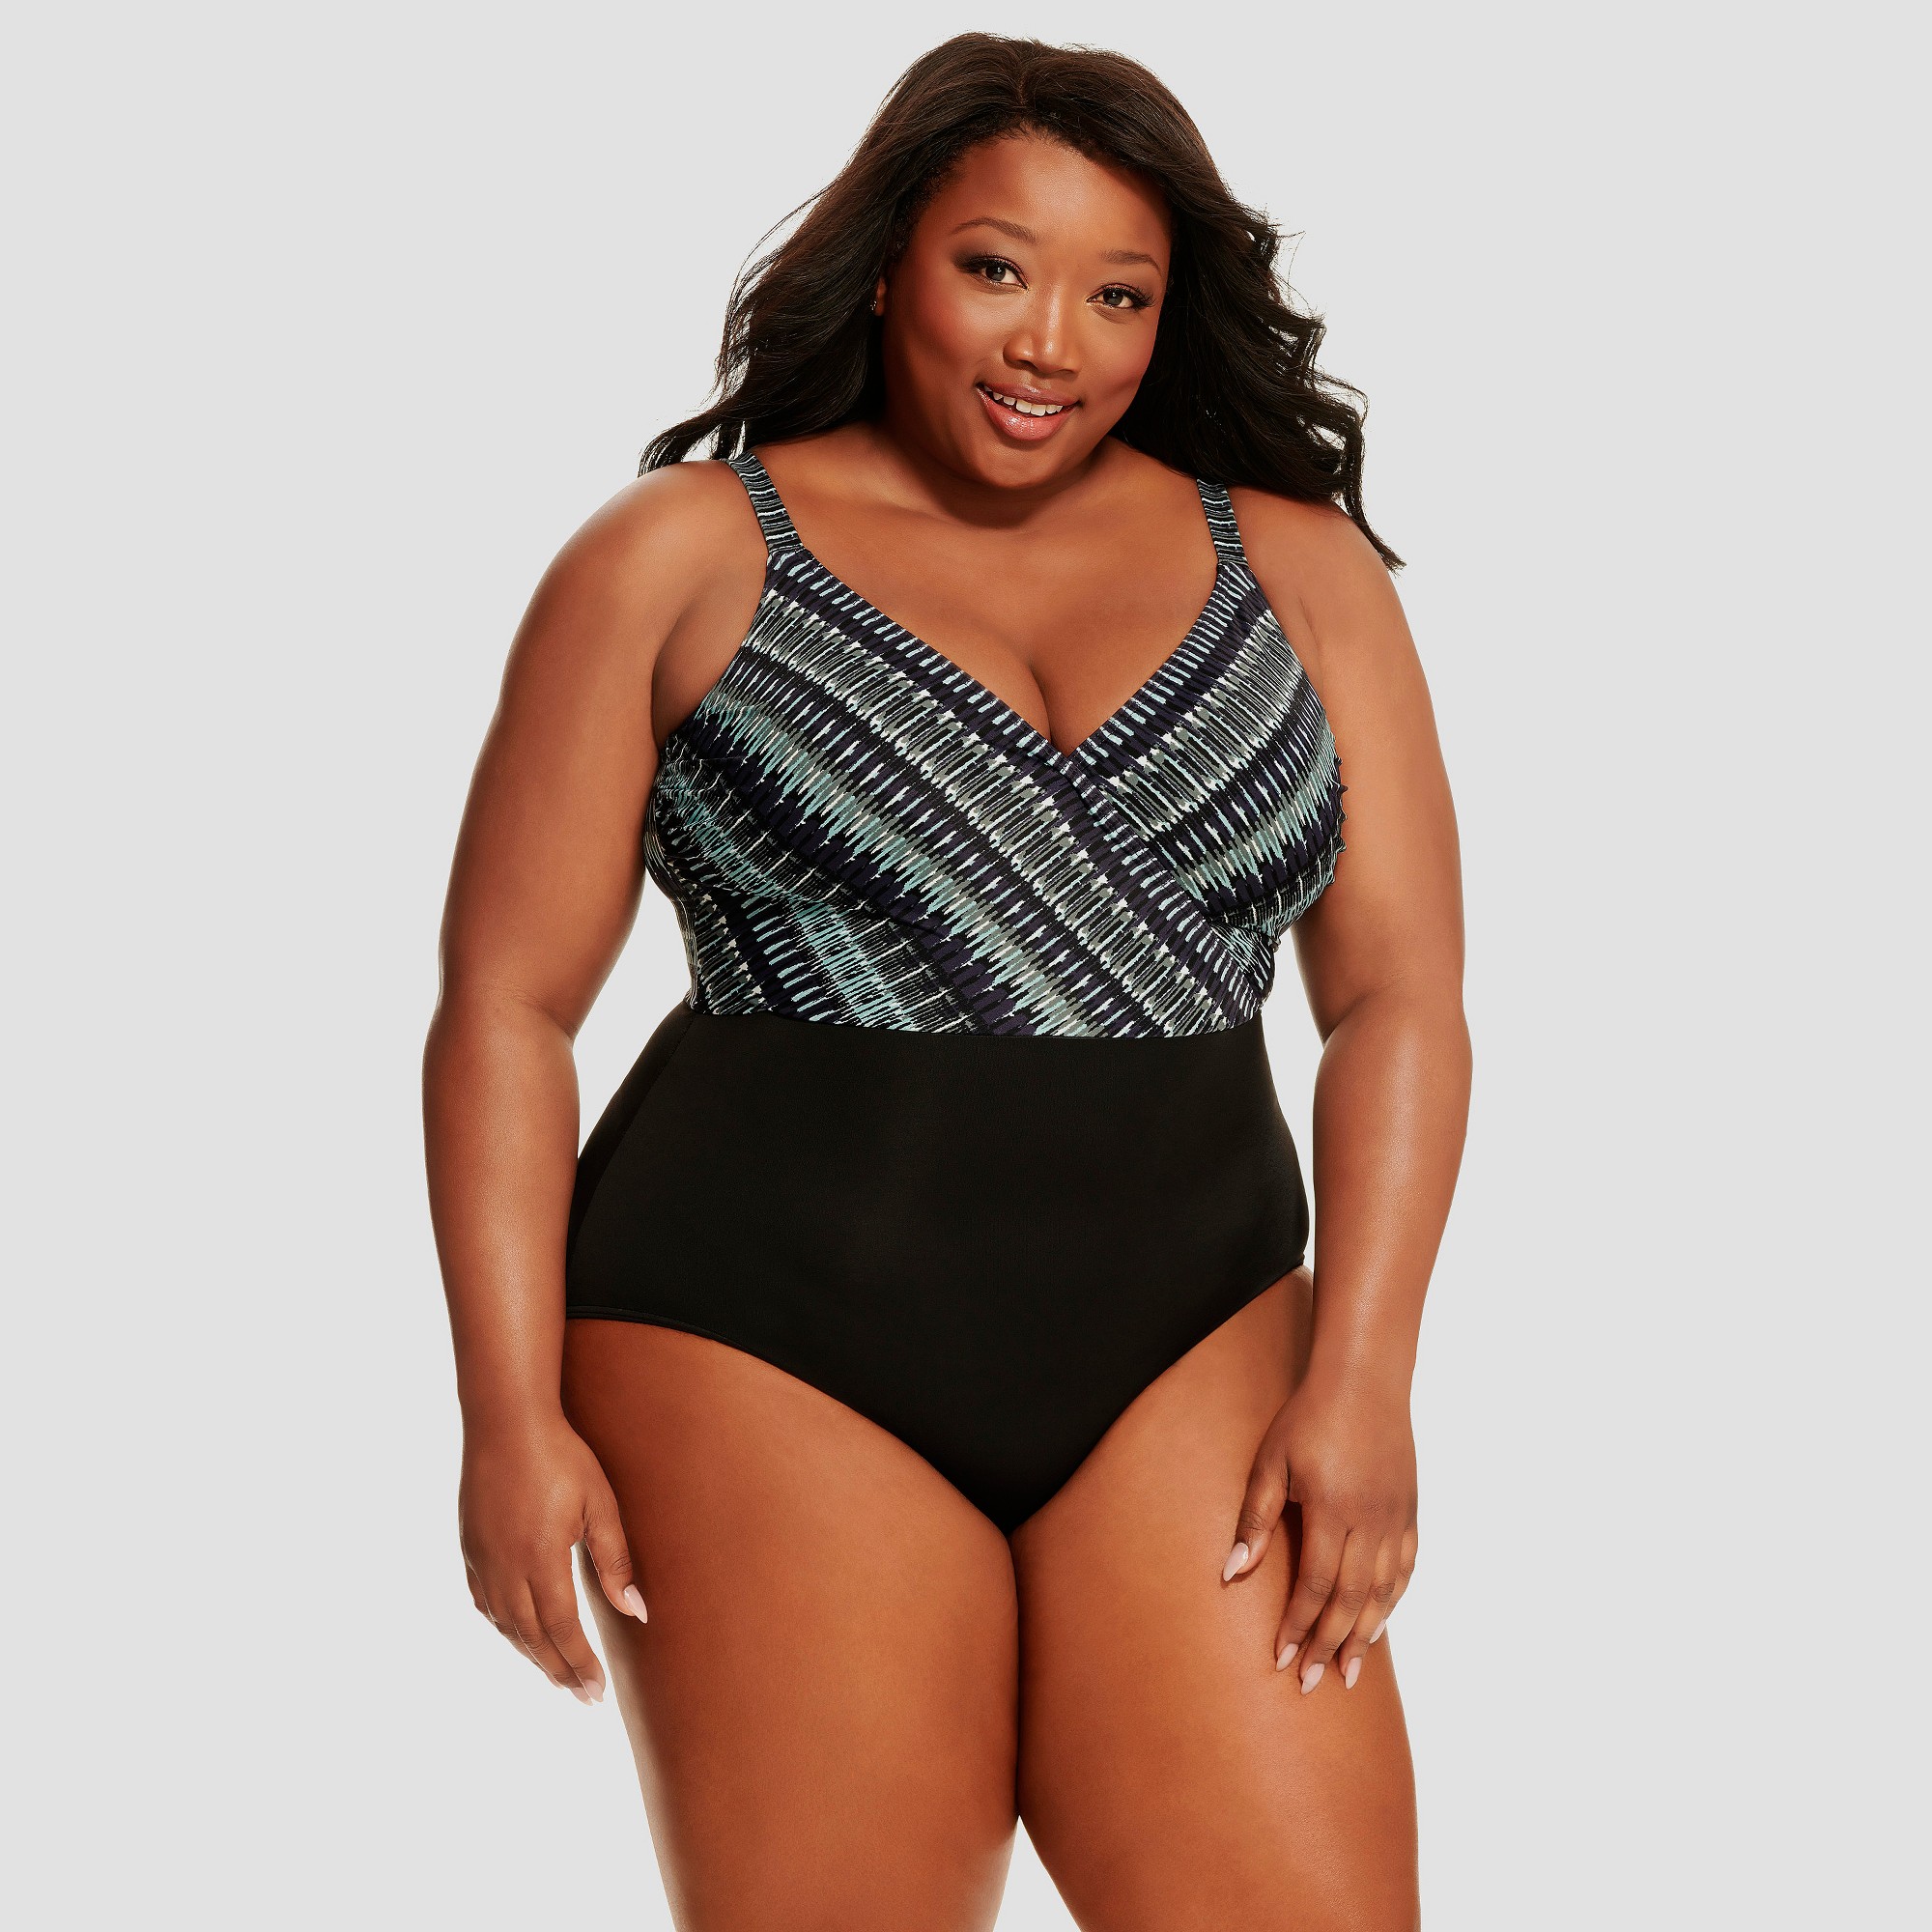 Women's Slimming Control One Piece Swimsuit - Dreamsuit by Miracle Brands  Black/Blue 24W, by Dreamsuit by Miracle Brands